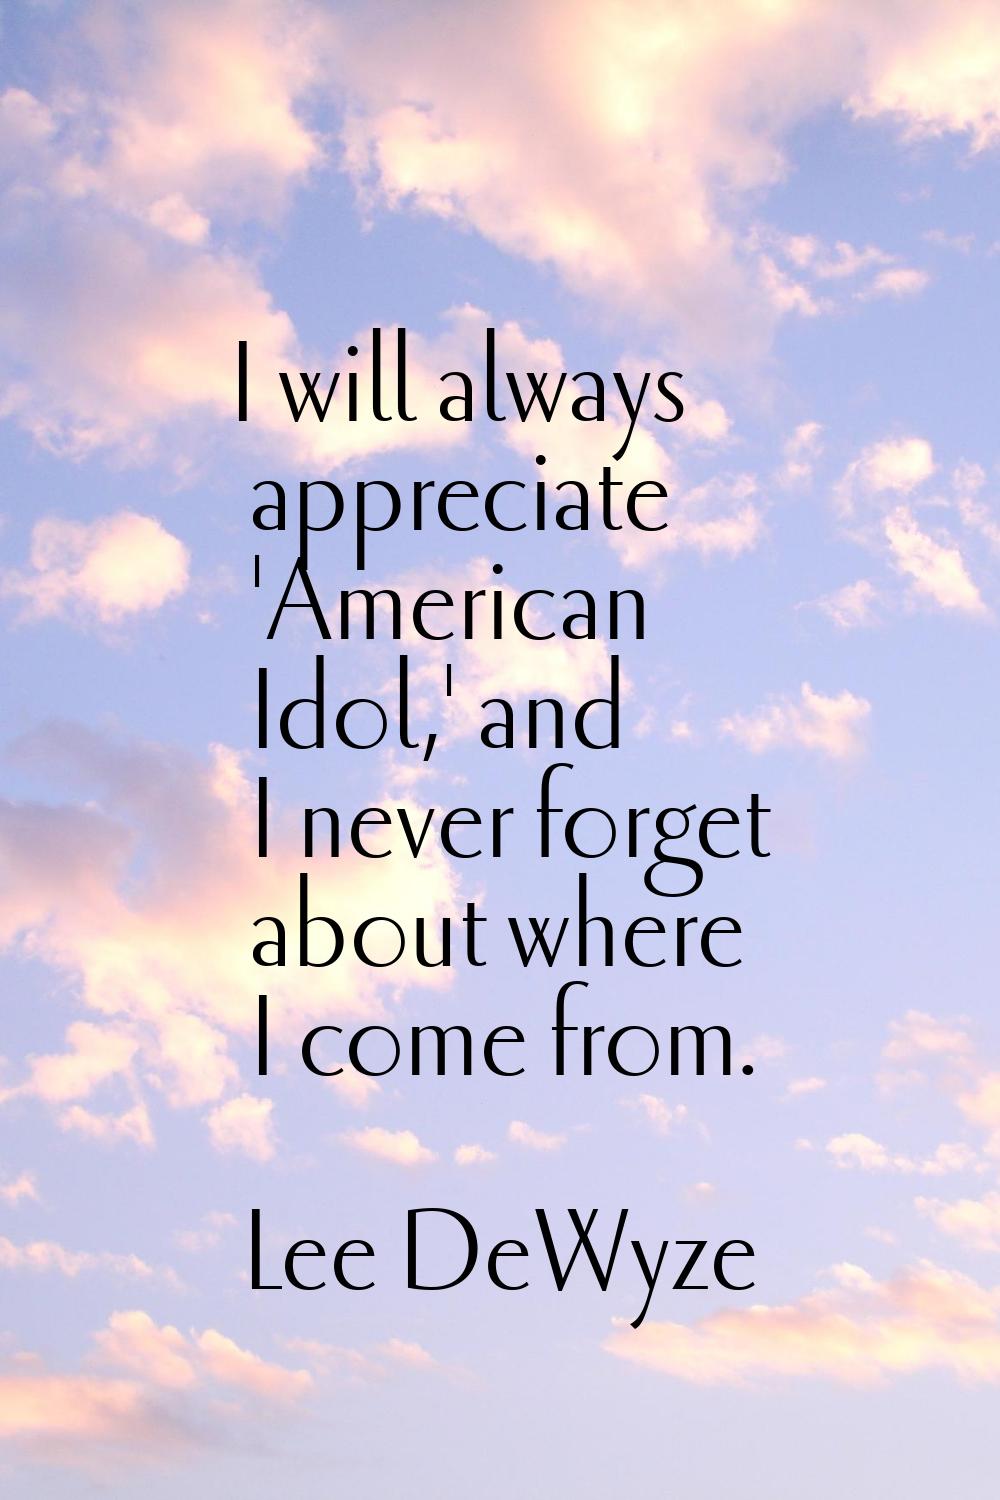 I will always appreciate 'American Idol,' and I never forget about where I come from.